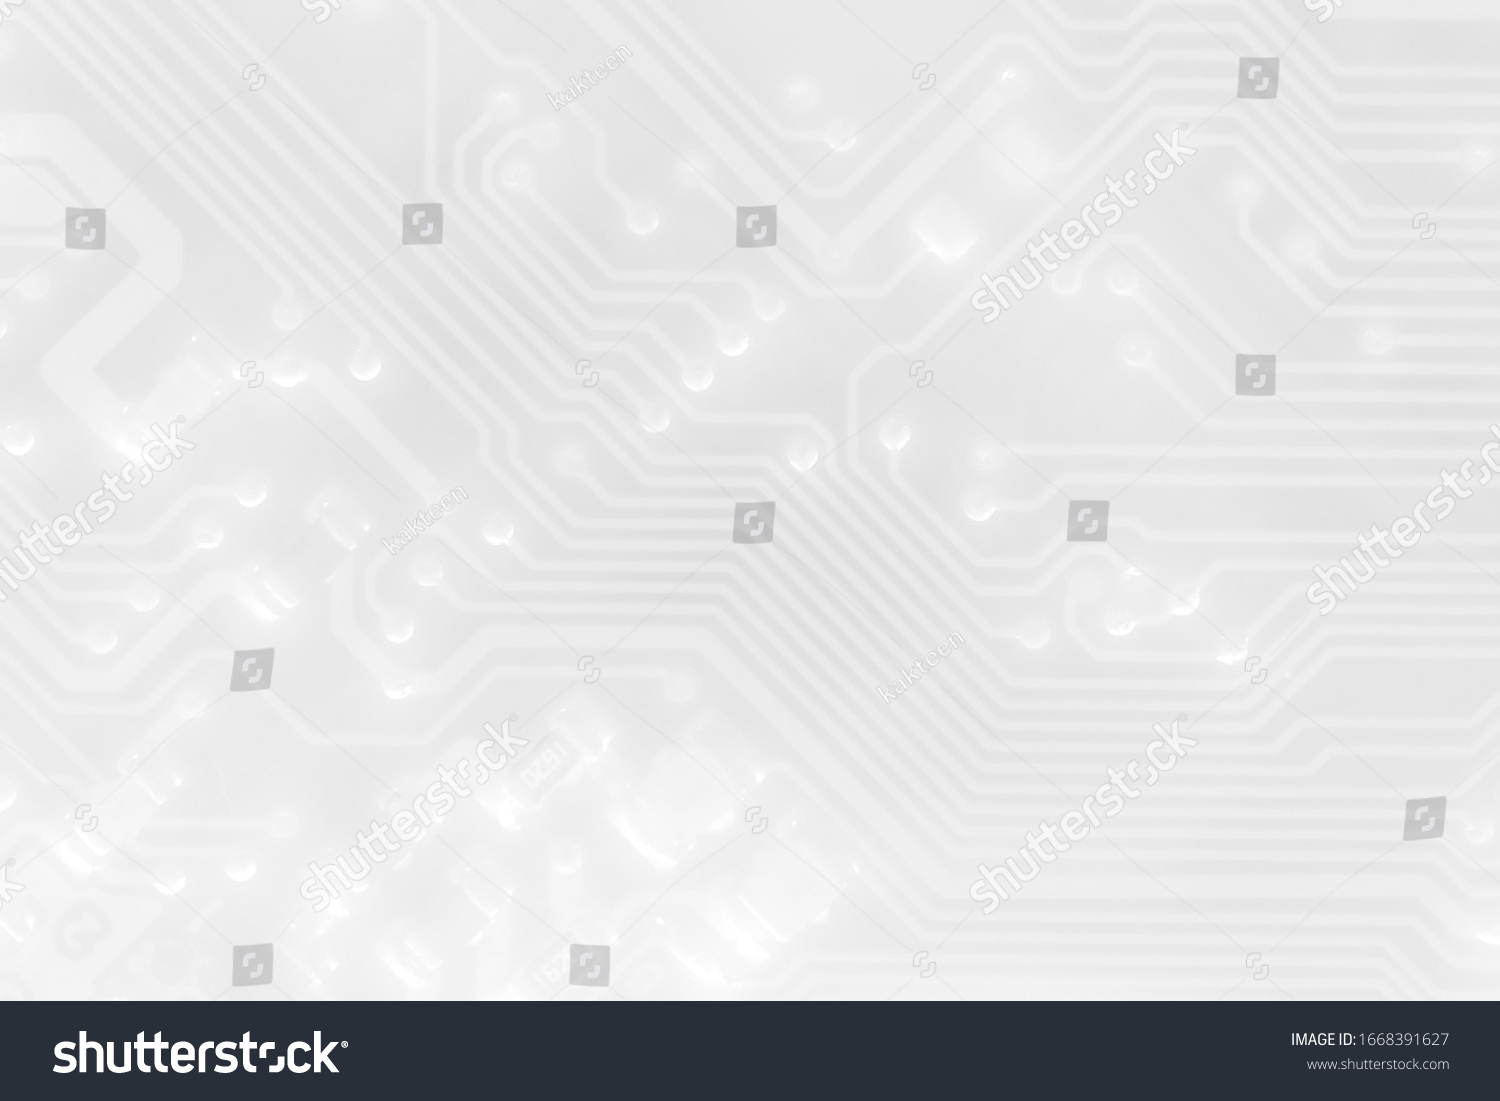 White texture background of printed circuit board. Computer technology background. Information tech. Space for text. Gray scale pcb background. #1668391627